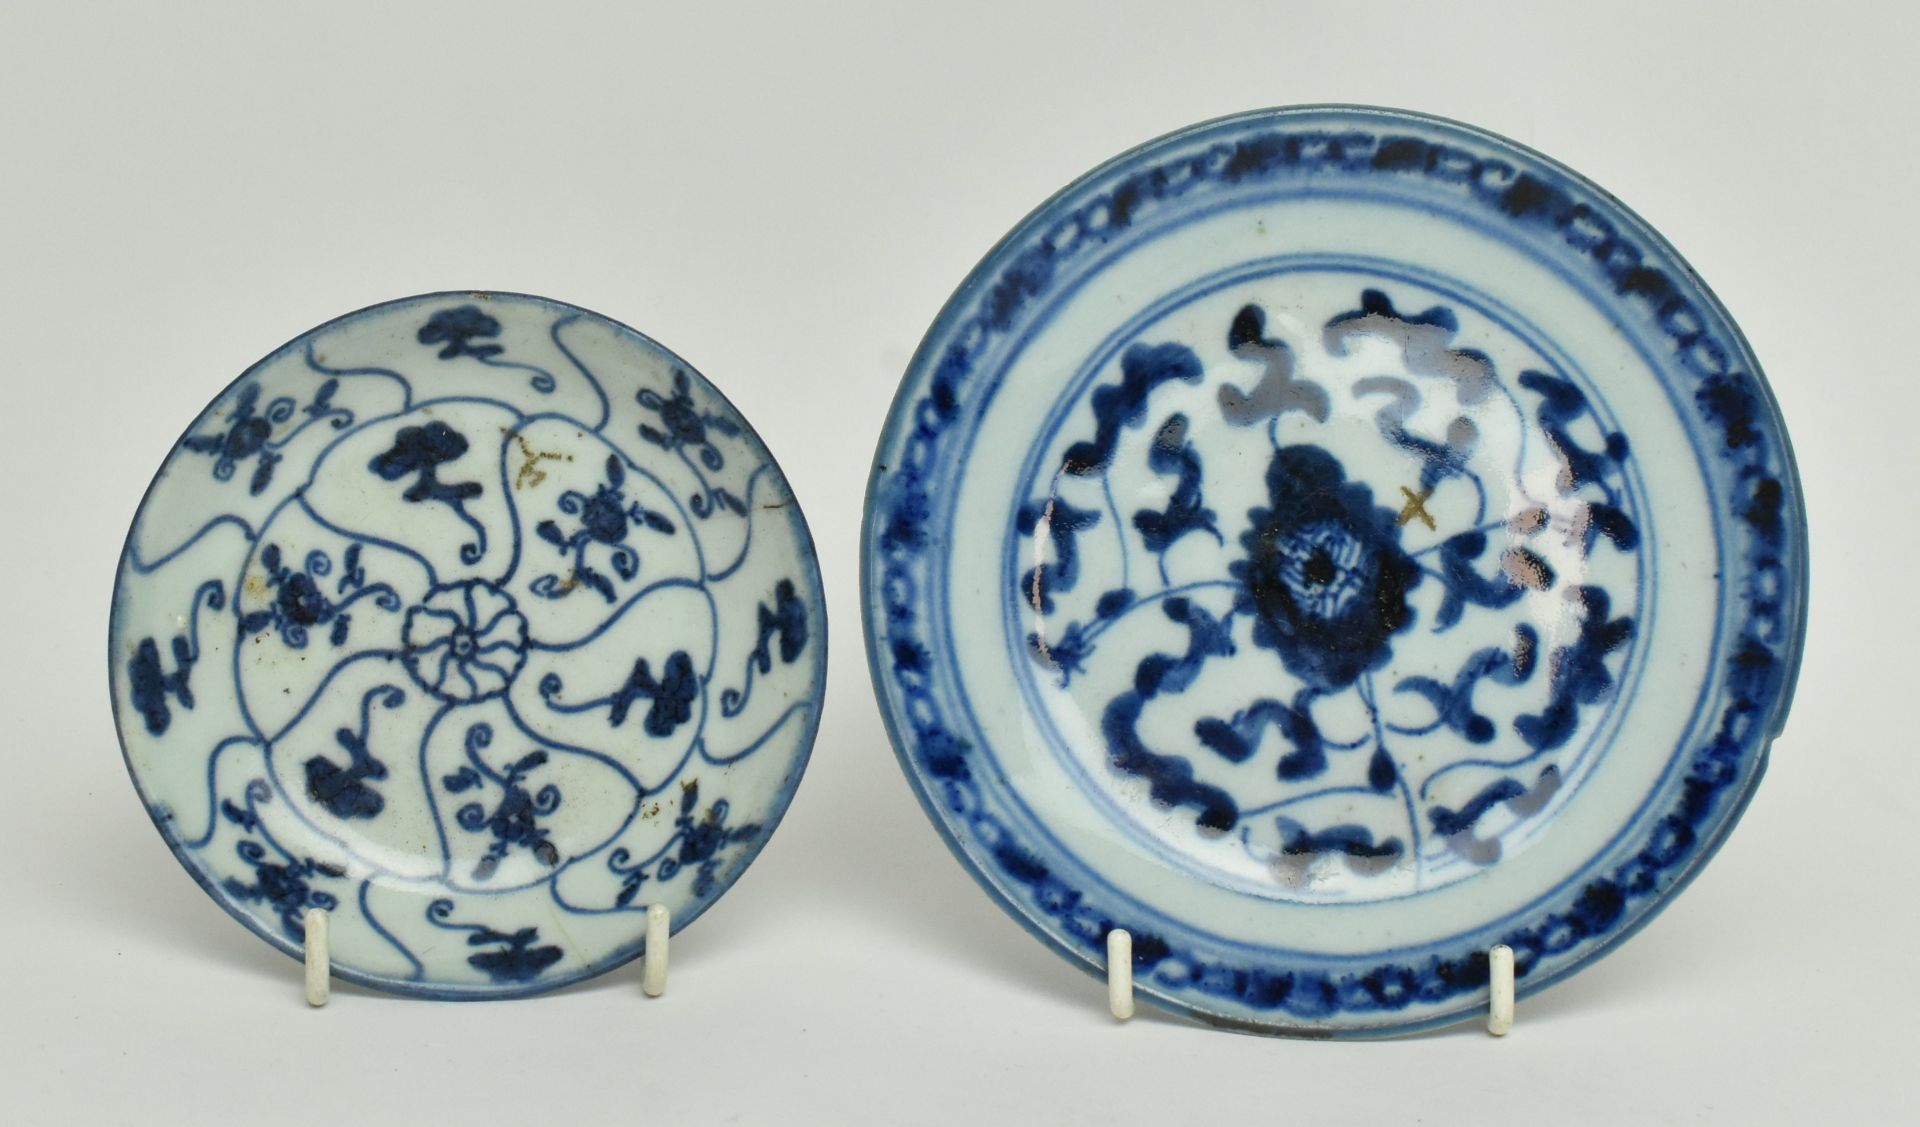 GROUP OF SIX BLUE AND WHITE EXPORT PLATES, QING DYNASTY - Image 4 of 7